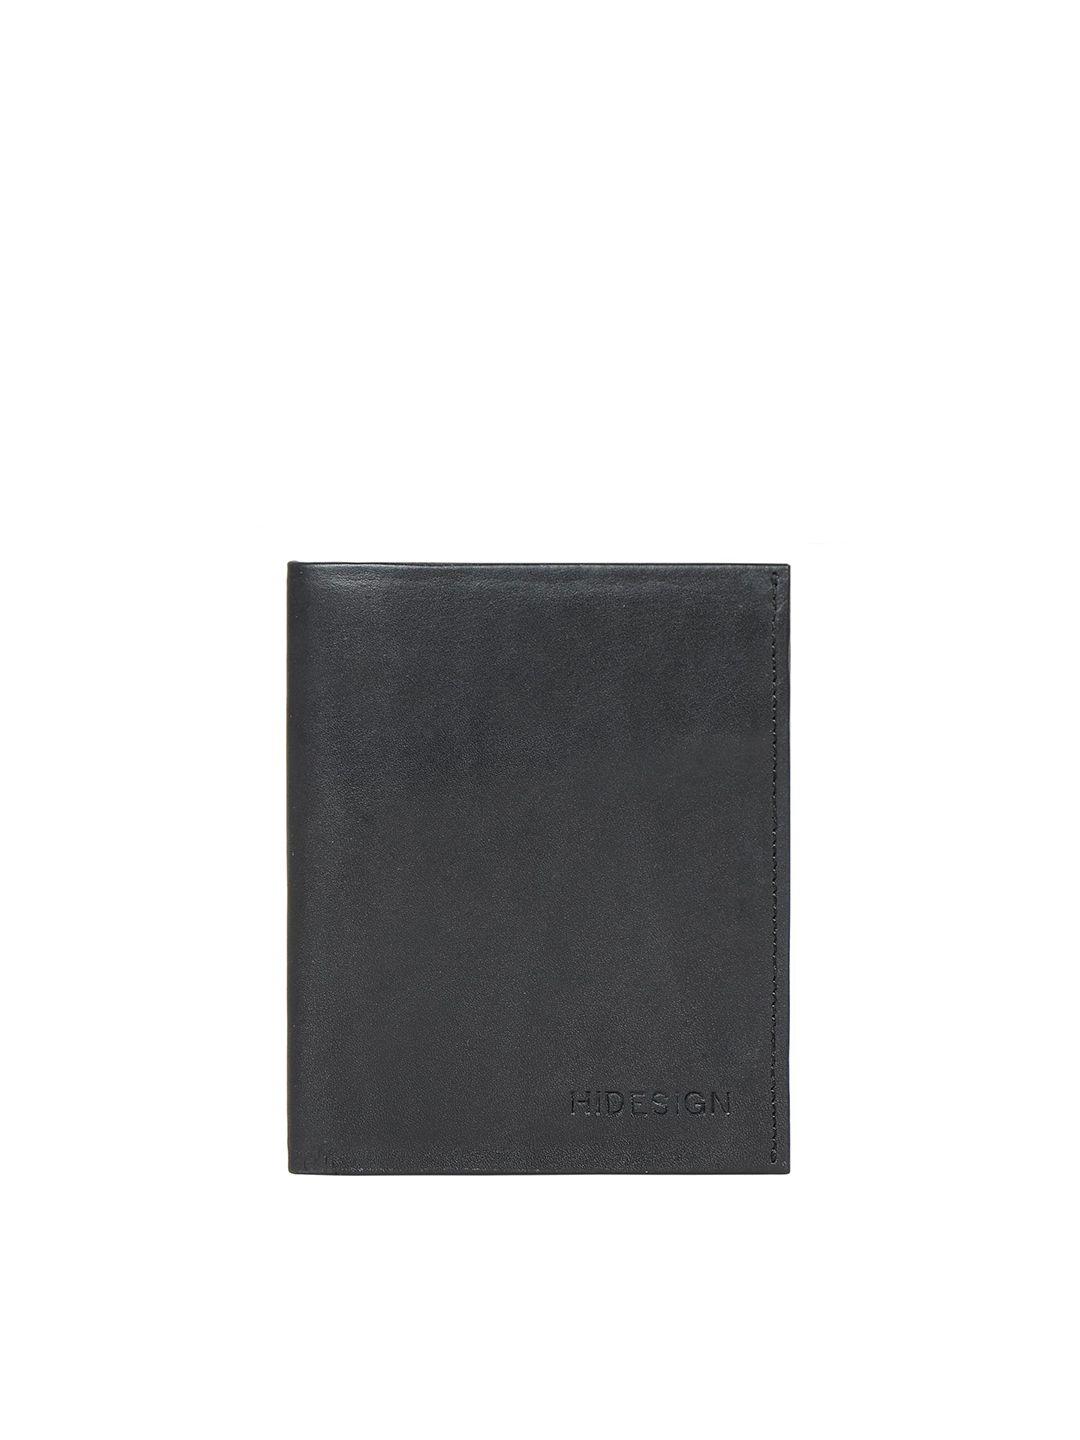 hidesign men black textured leather two fold wallet